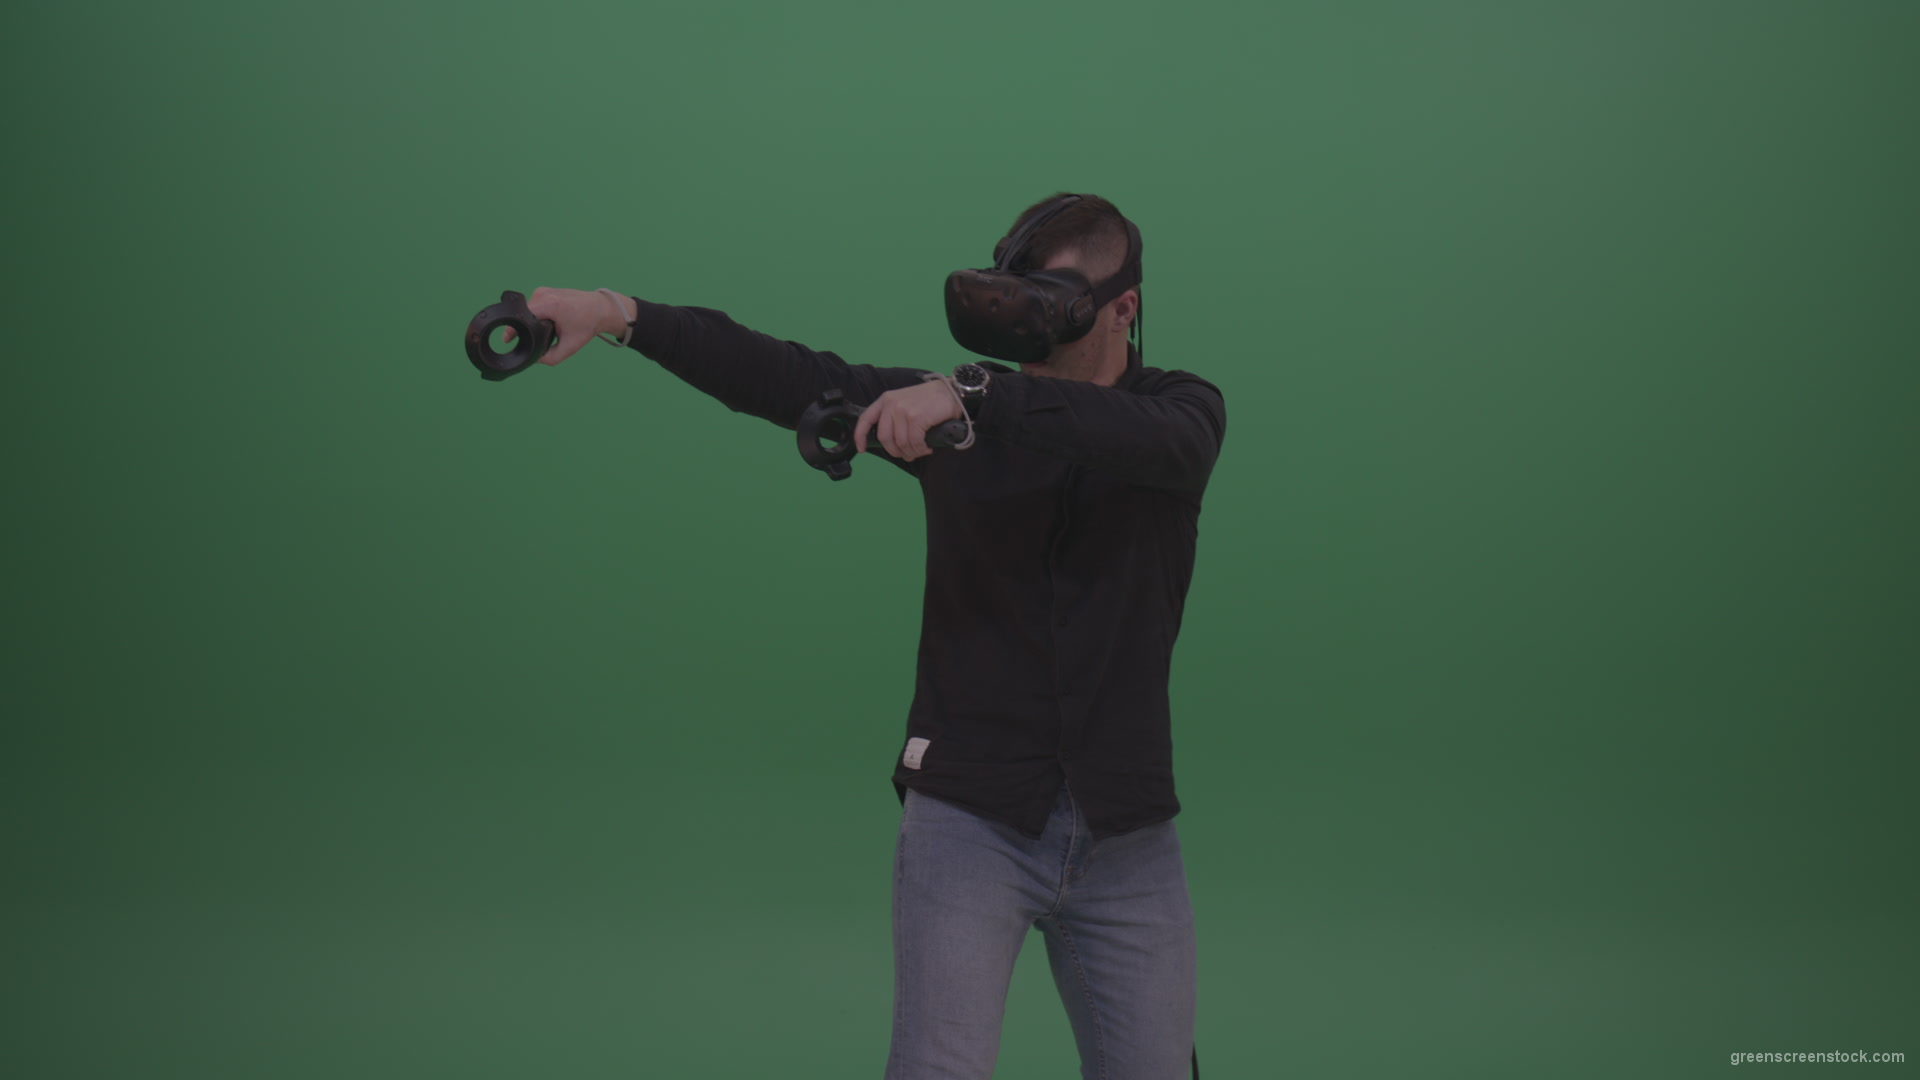 vj video background Young_Dangerous_Brunette_Man_Wearing_Black_Shirt_Shooting_Enemies_All_Around_In_Virtual_Reality_Glasses_Green_Screen_Wall_Background_003